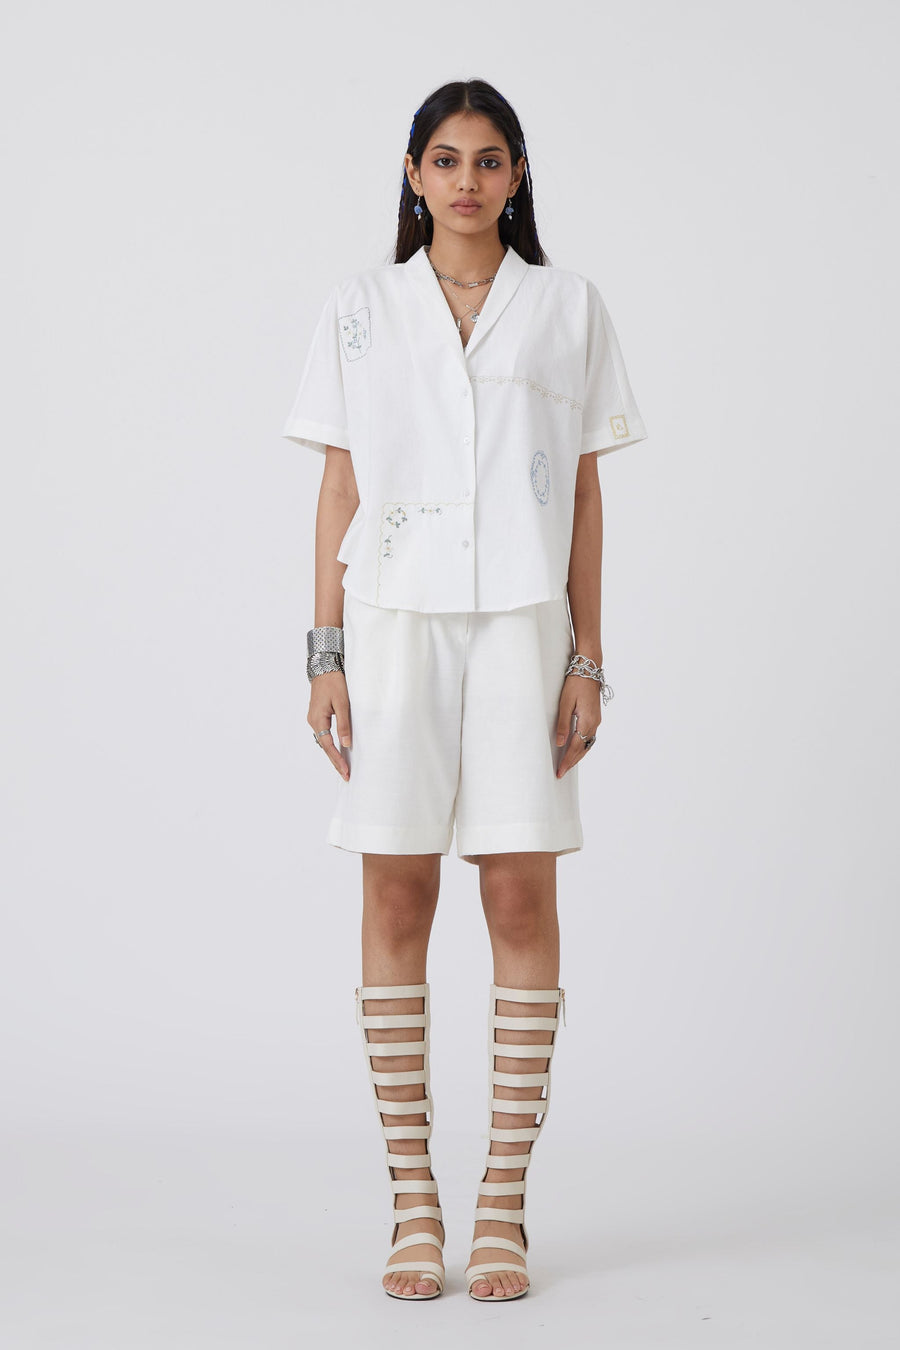 A Model Wearing White Handwoven Cotton Kati - Shirt, curated by Only Ethikal